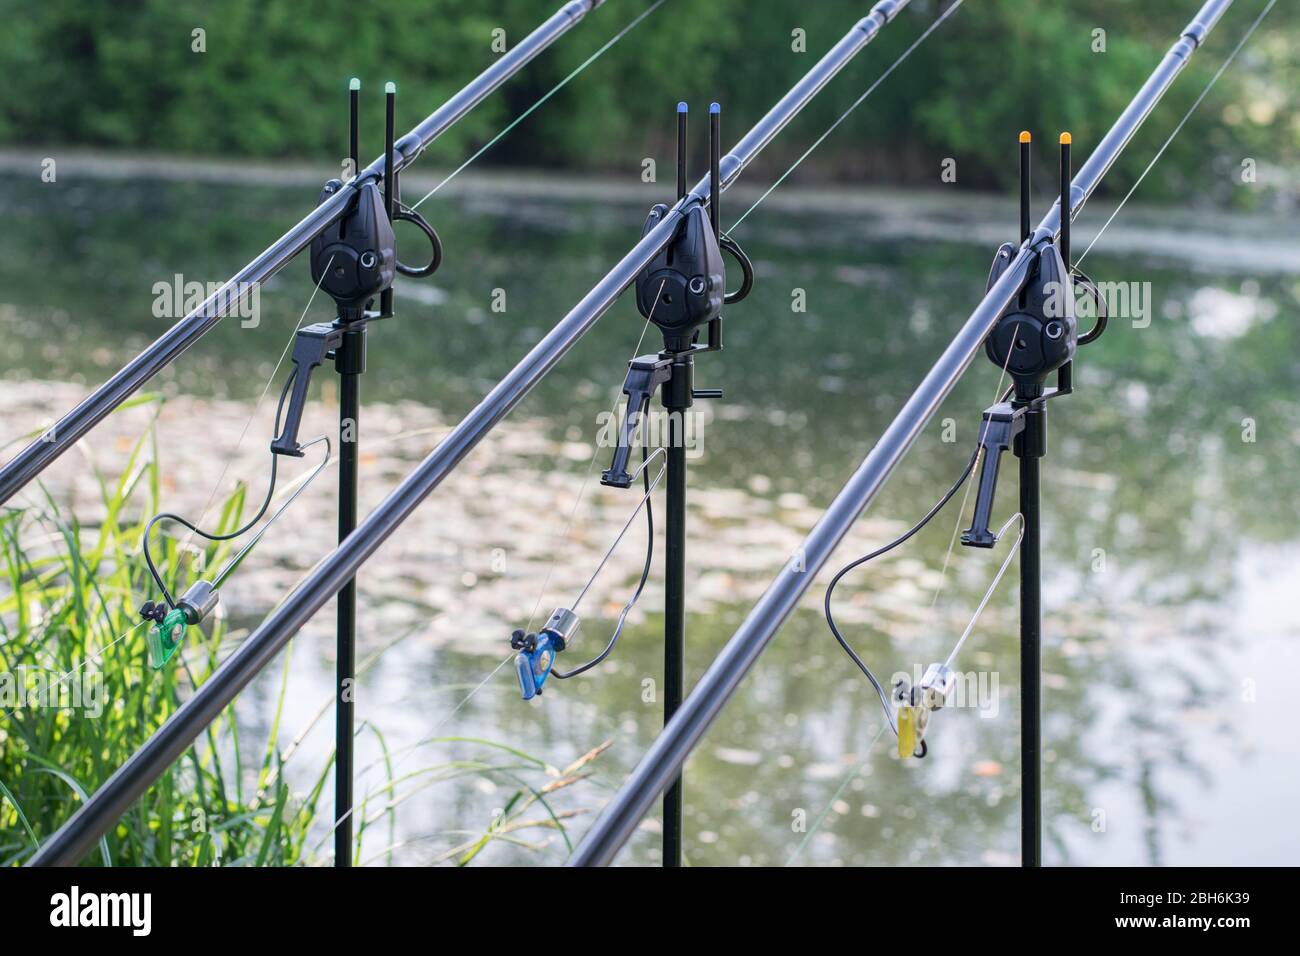 Professional fishing equipment background with - Stock